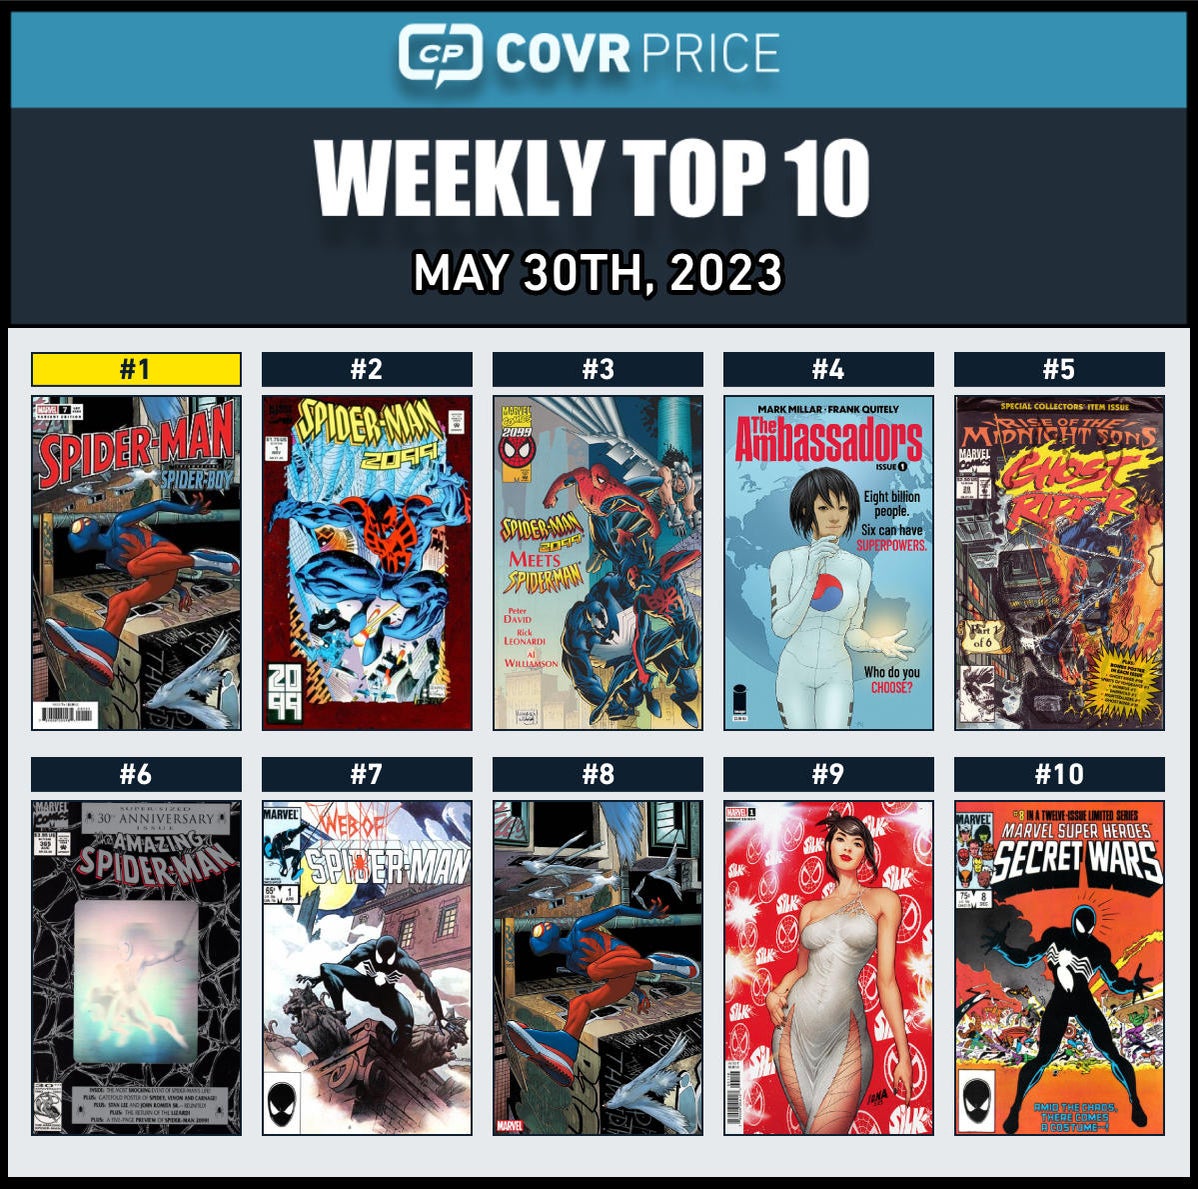 Top 10 Comic Books Rising in Value in the Last Week Include Midnight Sons and Tons of Spider-Verse